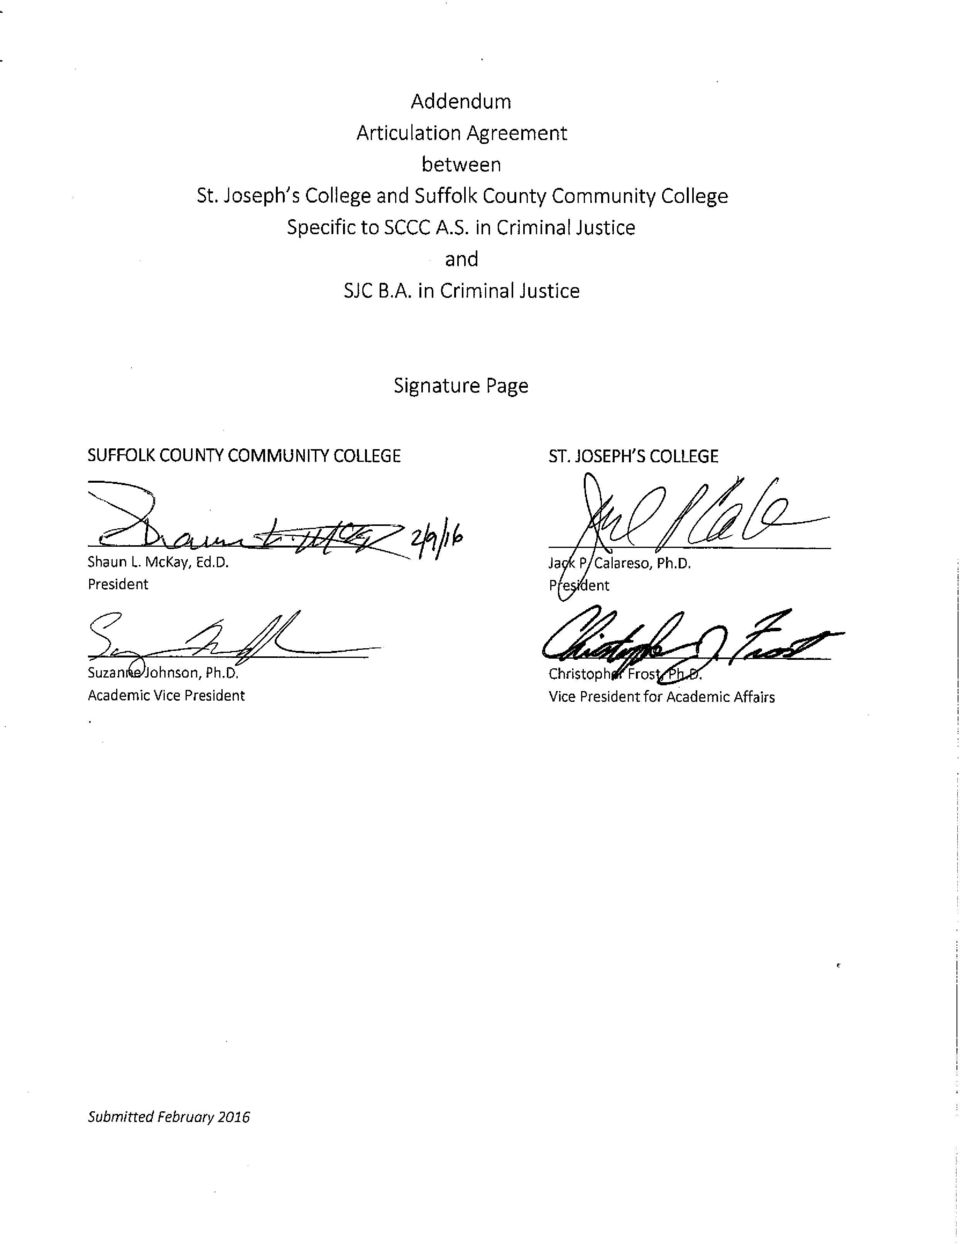 A. in Criminal Justice Signature Page SUFFOLK COUNTY COMMUNITY COLLEGE ST.